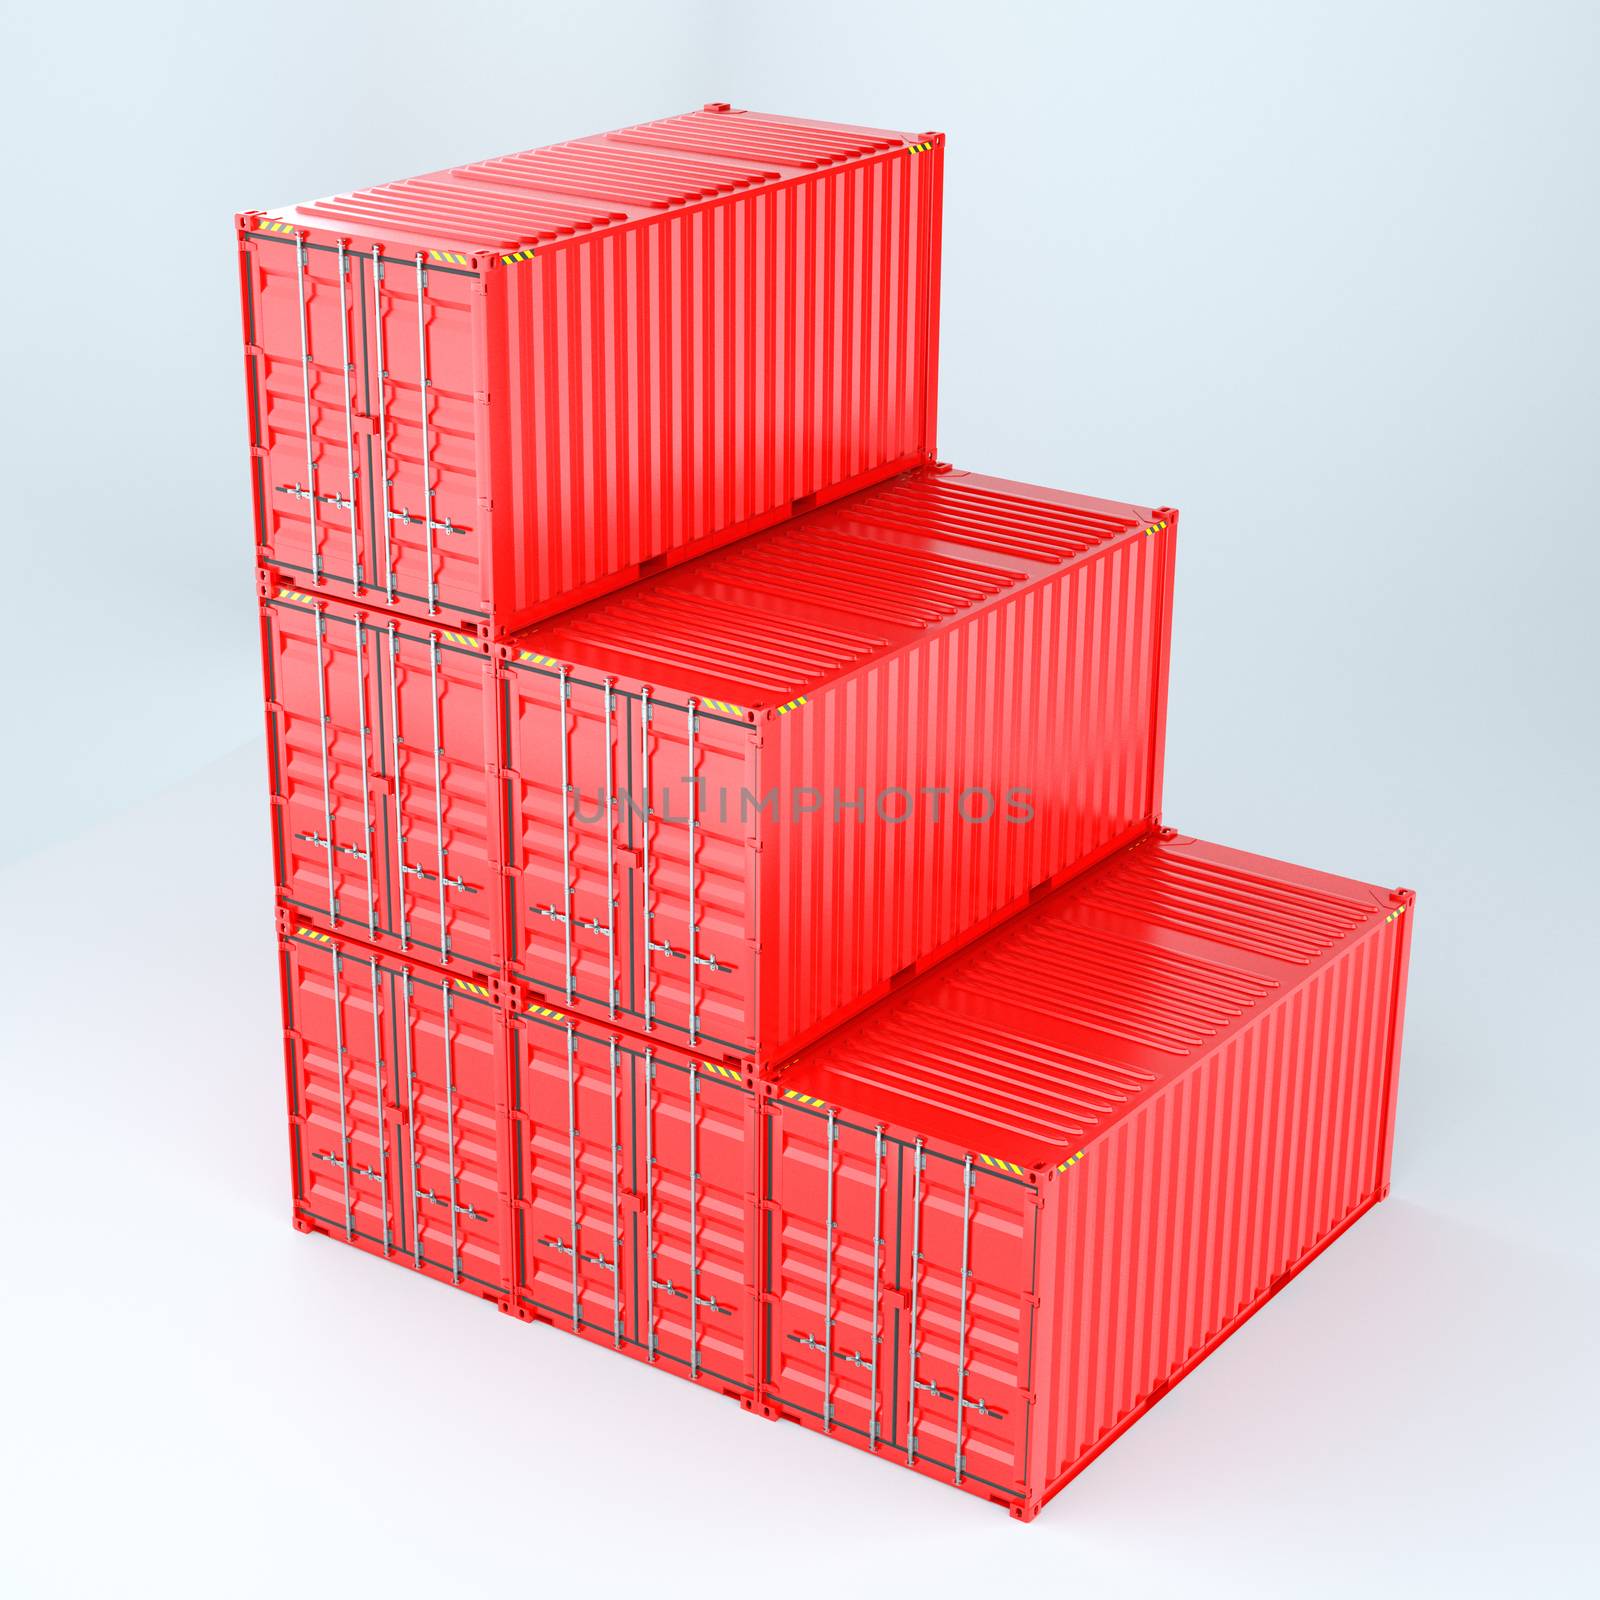 3d rendering of a shipping 20ft containers. Isoalted on white